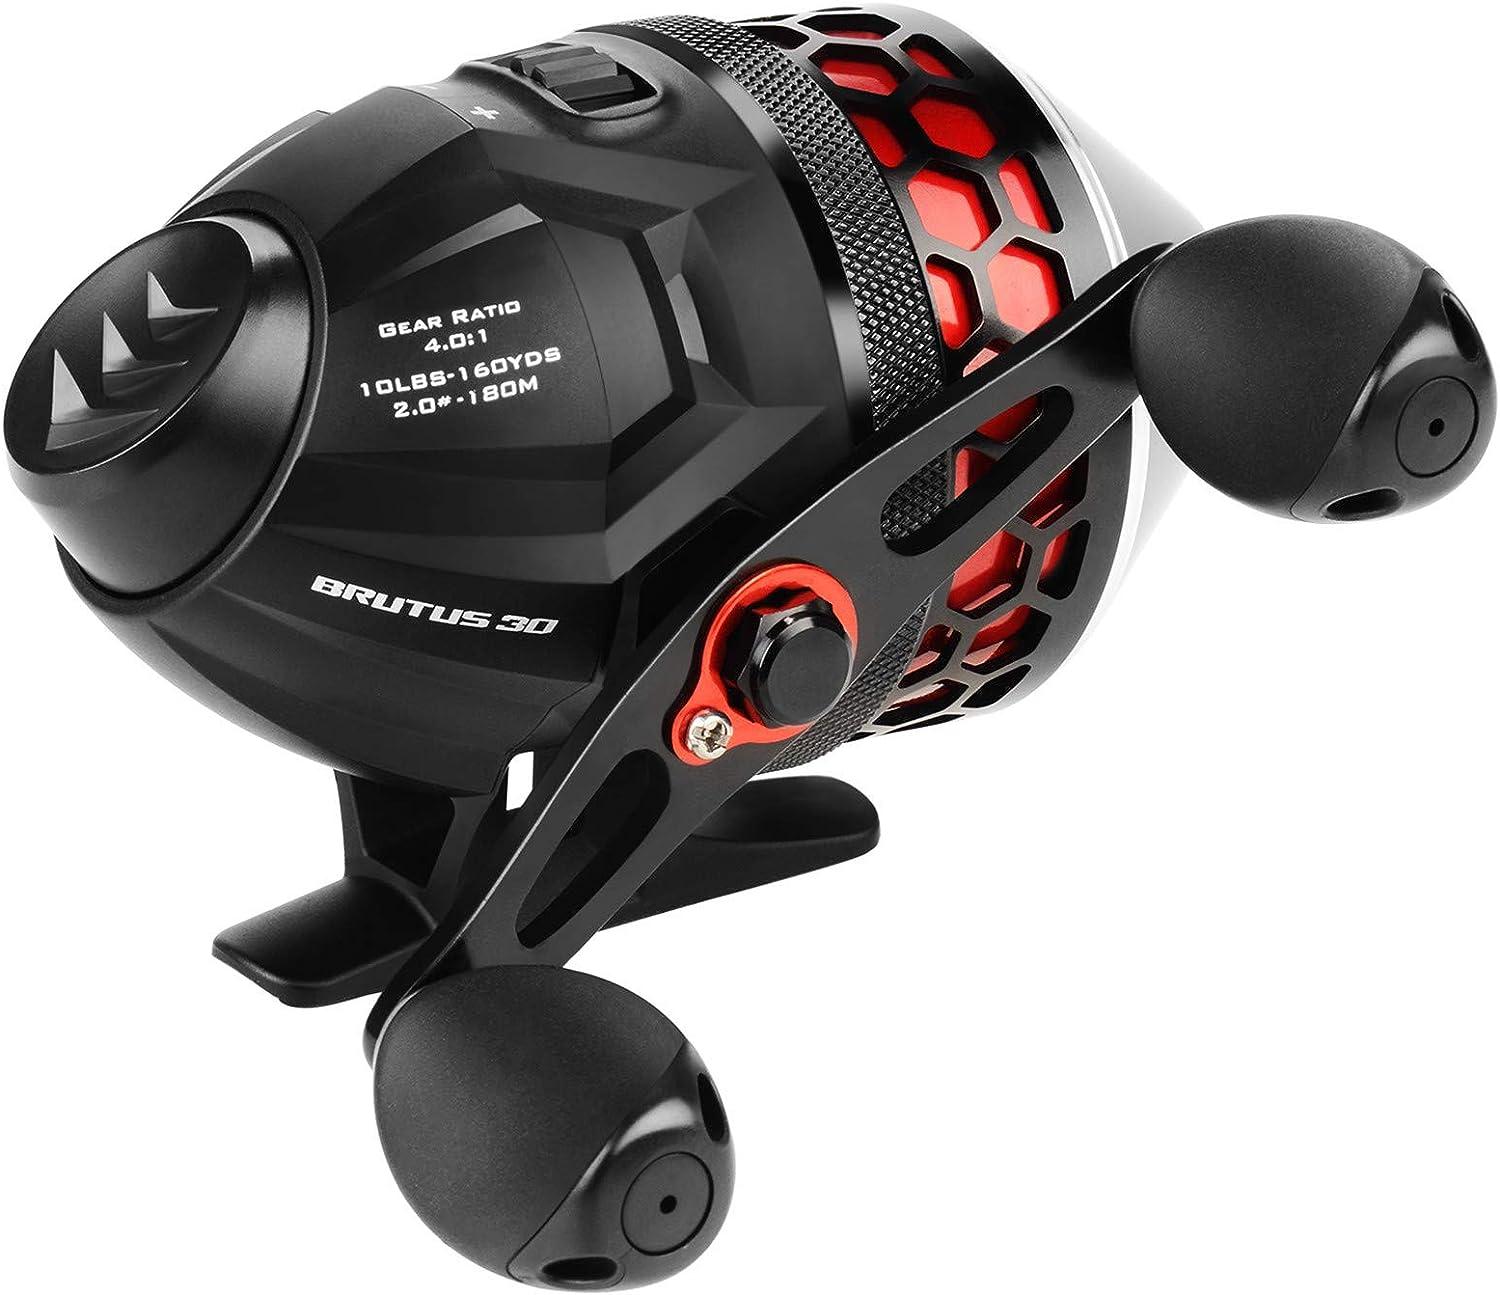 KastKing Brutus Spincast Fishing Reel,Easy to Use Push Button Casting  Design,High Speed 4.0:1 Gear Ratio,5 MaxiDur Ball Bearings, Reversible  Handle for Left/Right Retrieve, Includes Monofilament Line. Model 30